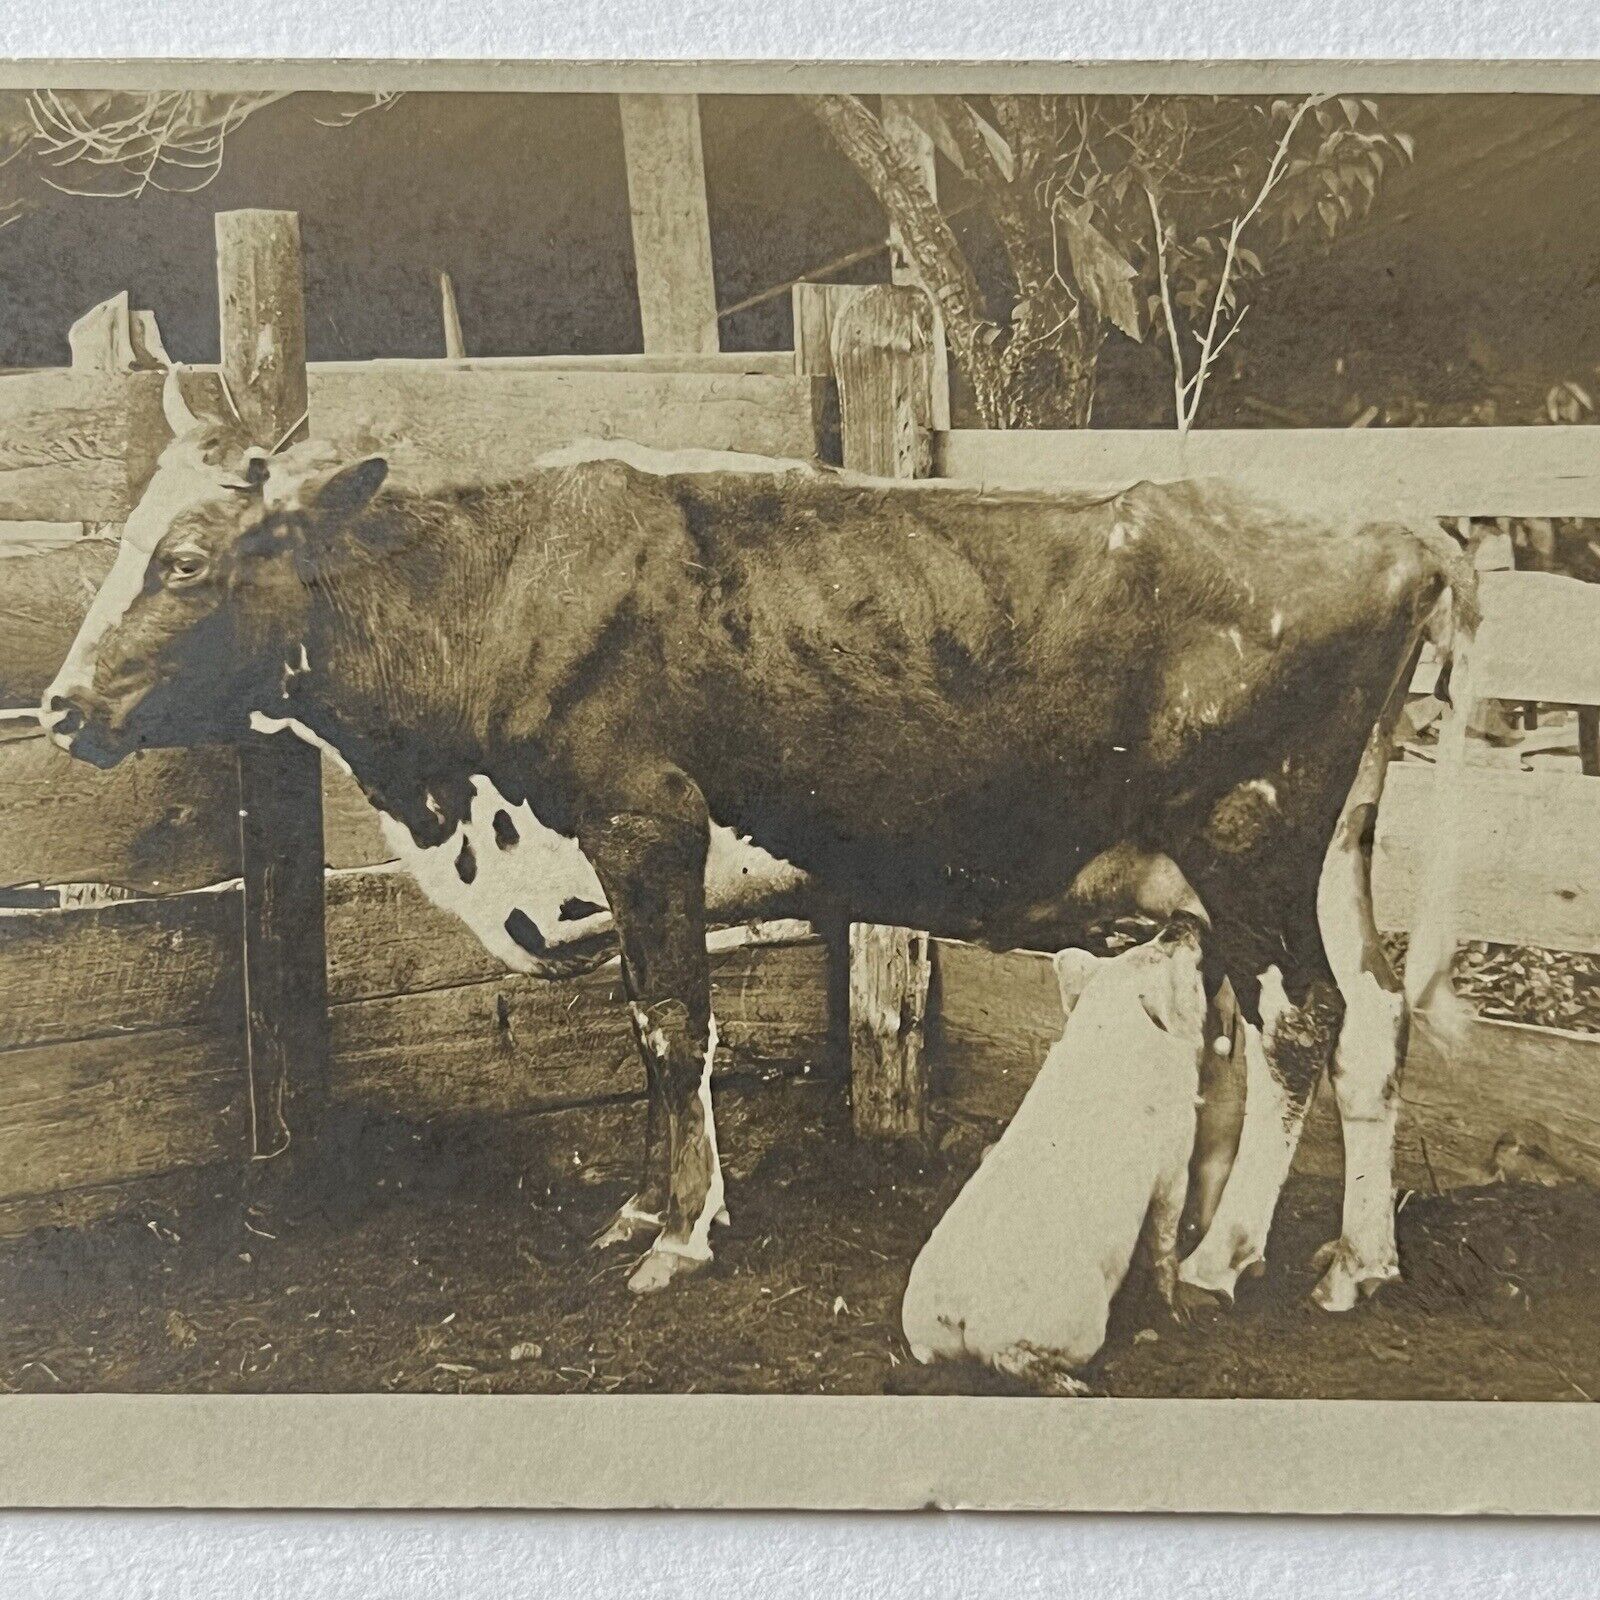 Antique RPPC Real Postcard Piglet Drinking Milk From Cow Funny Silly Farm Pig